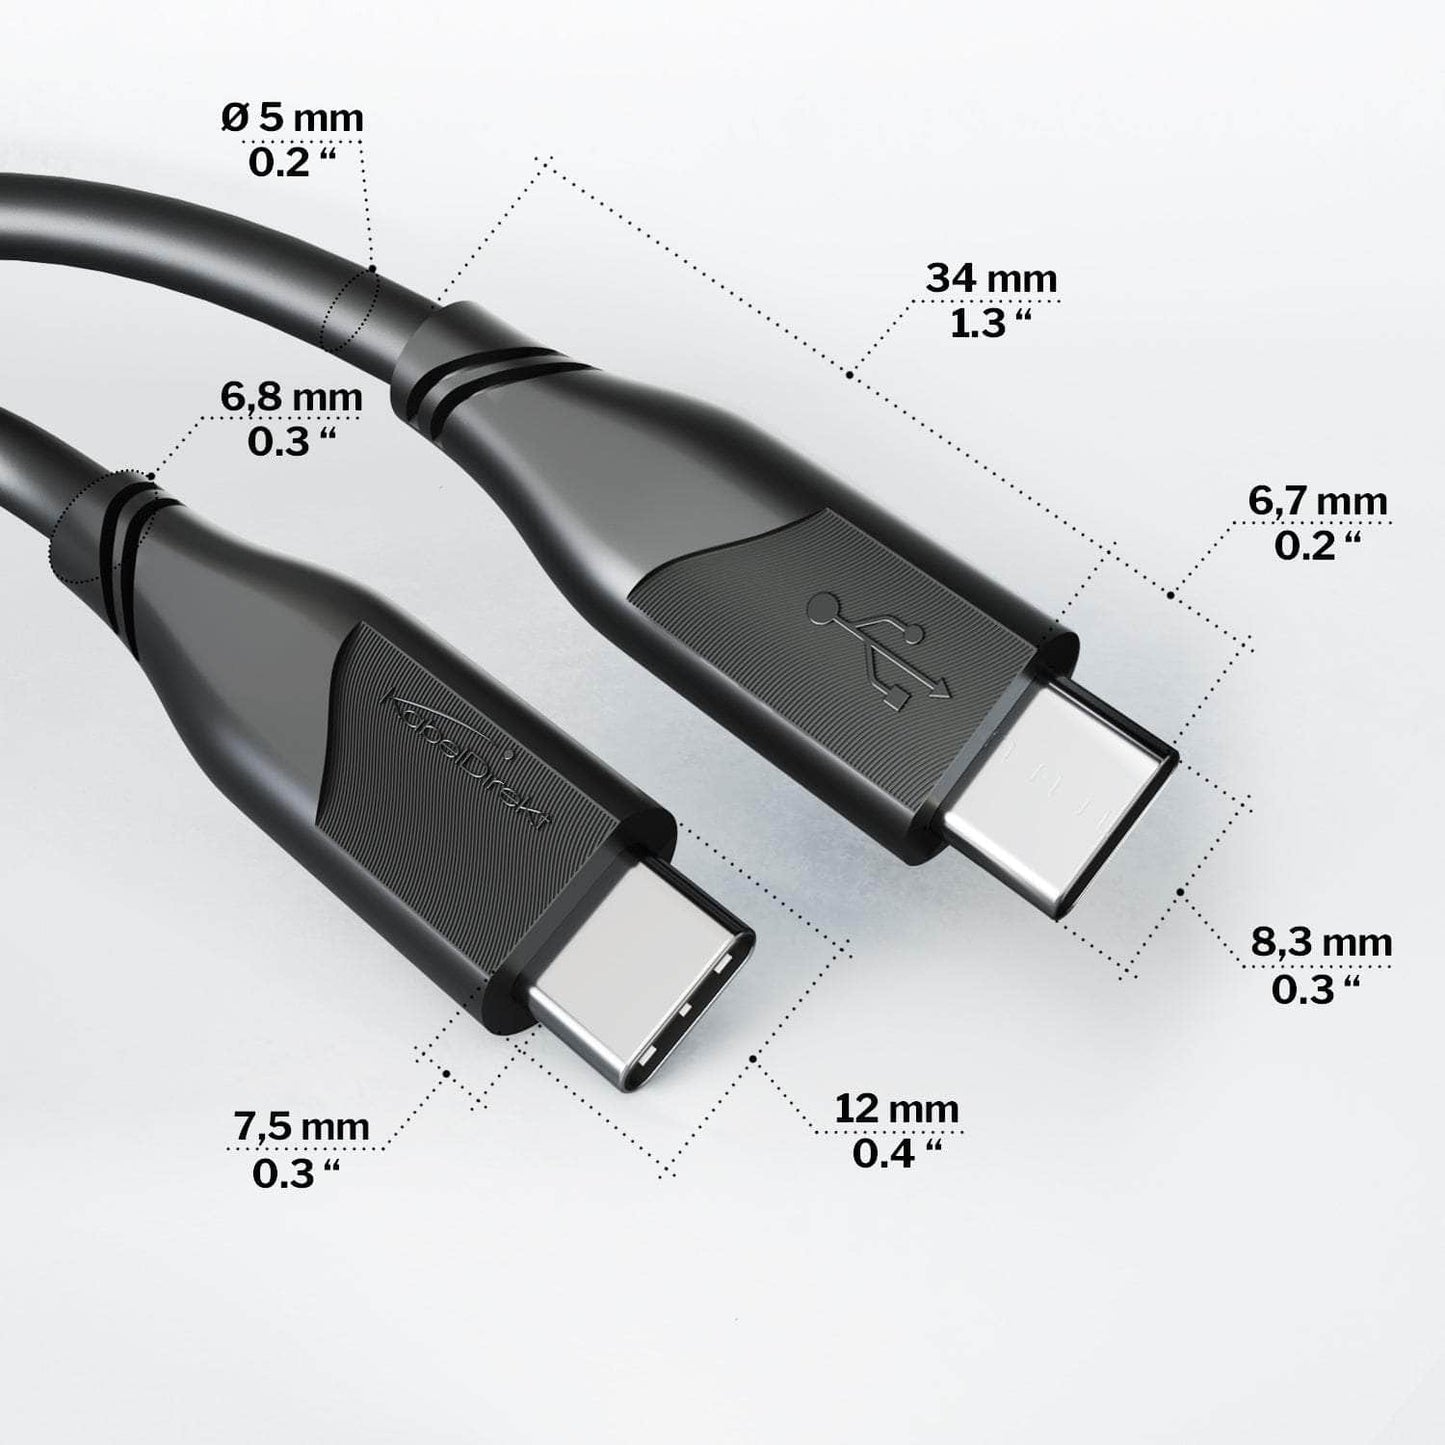 USB C Cable - USB 2.0, Power Delivery 3, black